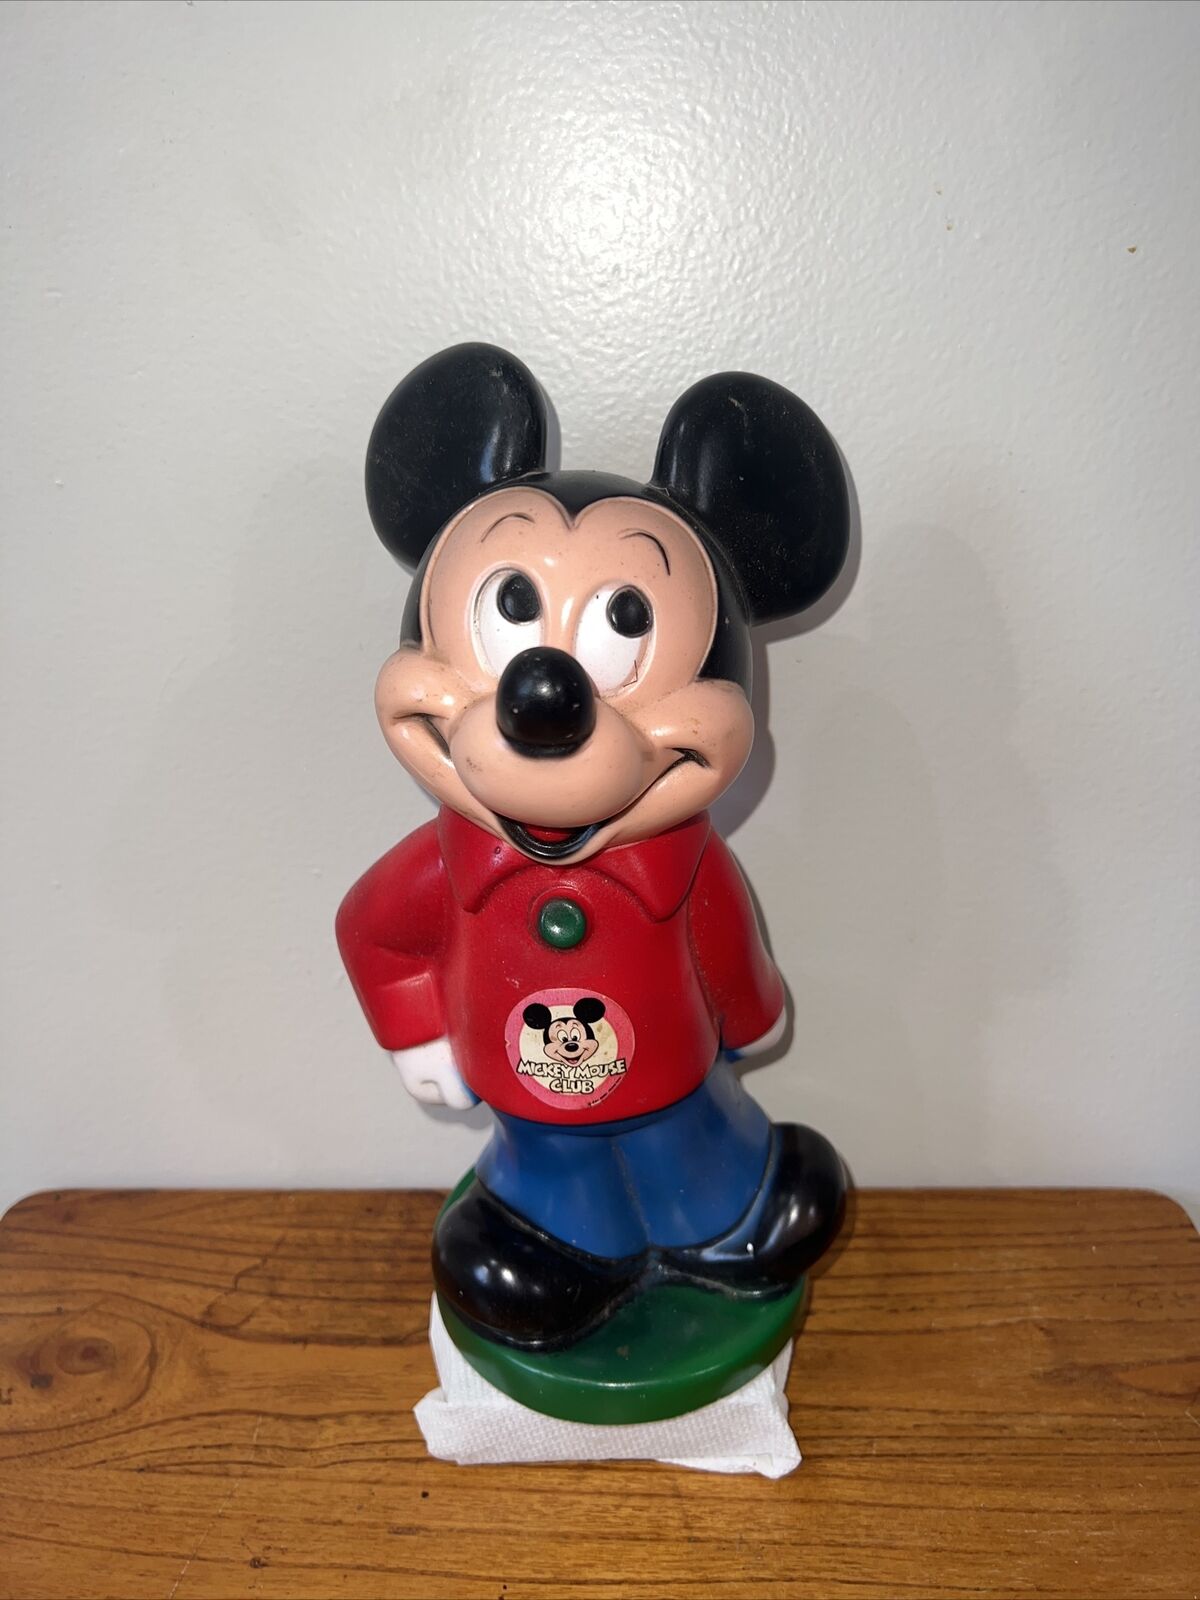 Vintage Mickey Mouse Coin Piggy Bank by Play Pal Plastics Walt Disney 1970’s